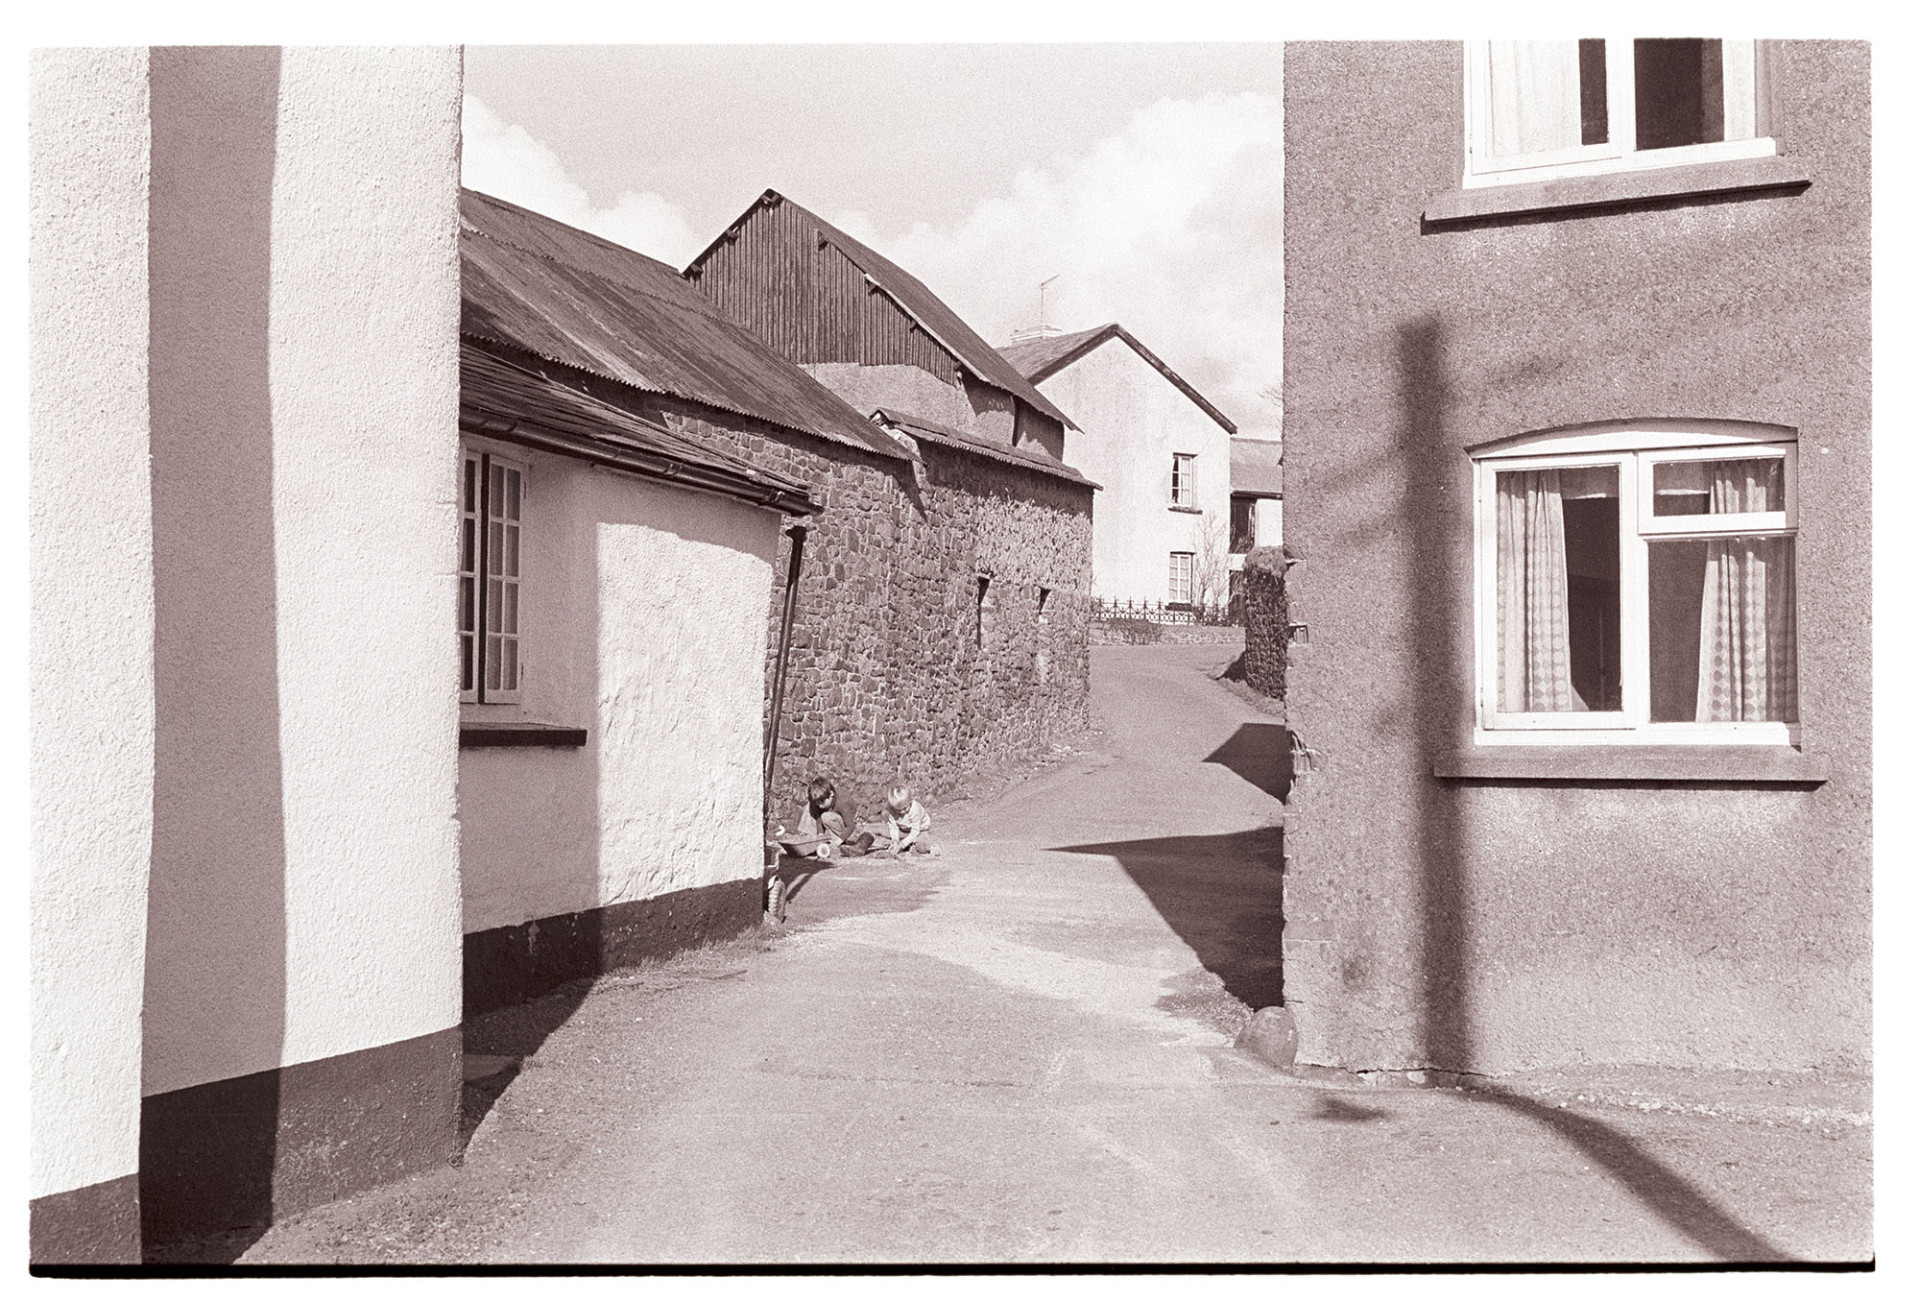 Village street, cob buildings.
[Two children playing in a street in High Bickington, in front of cob and stone buildings.]